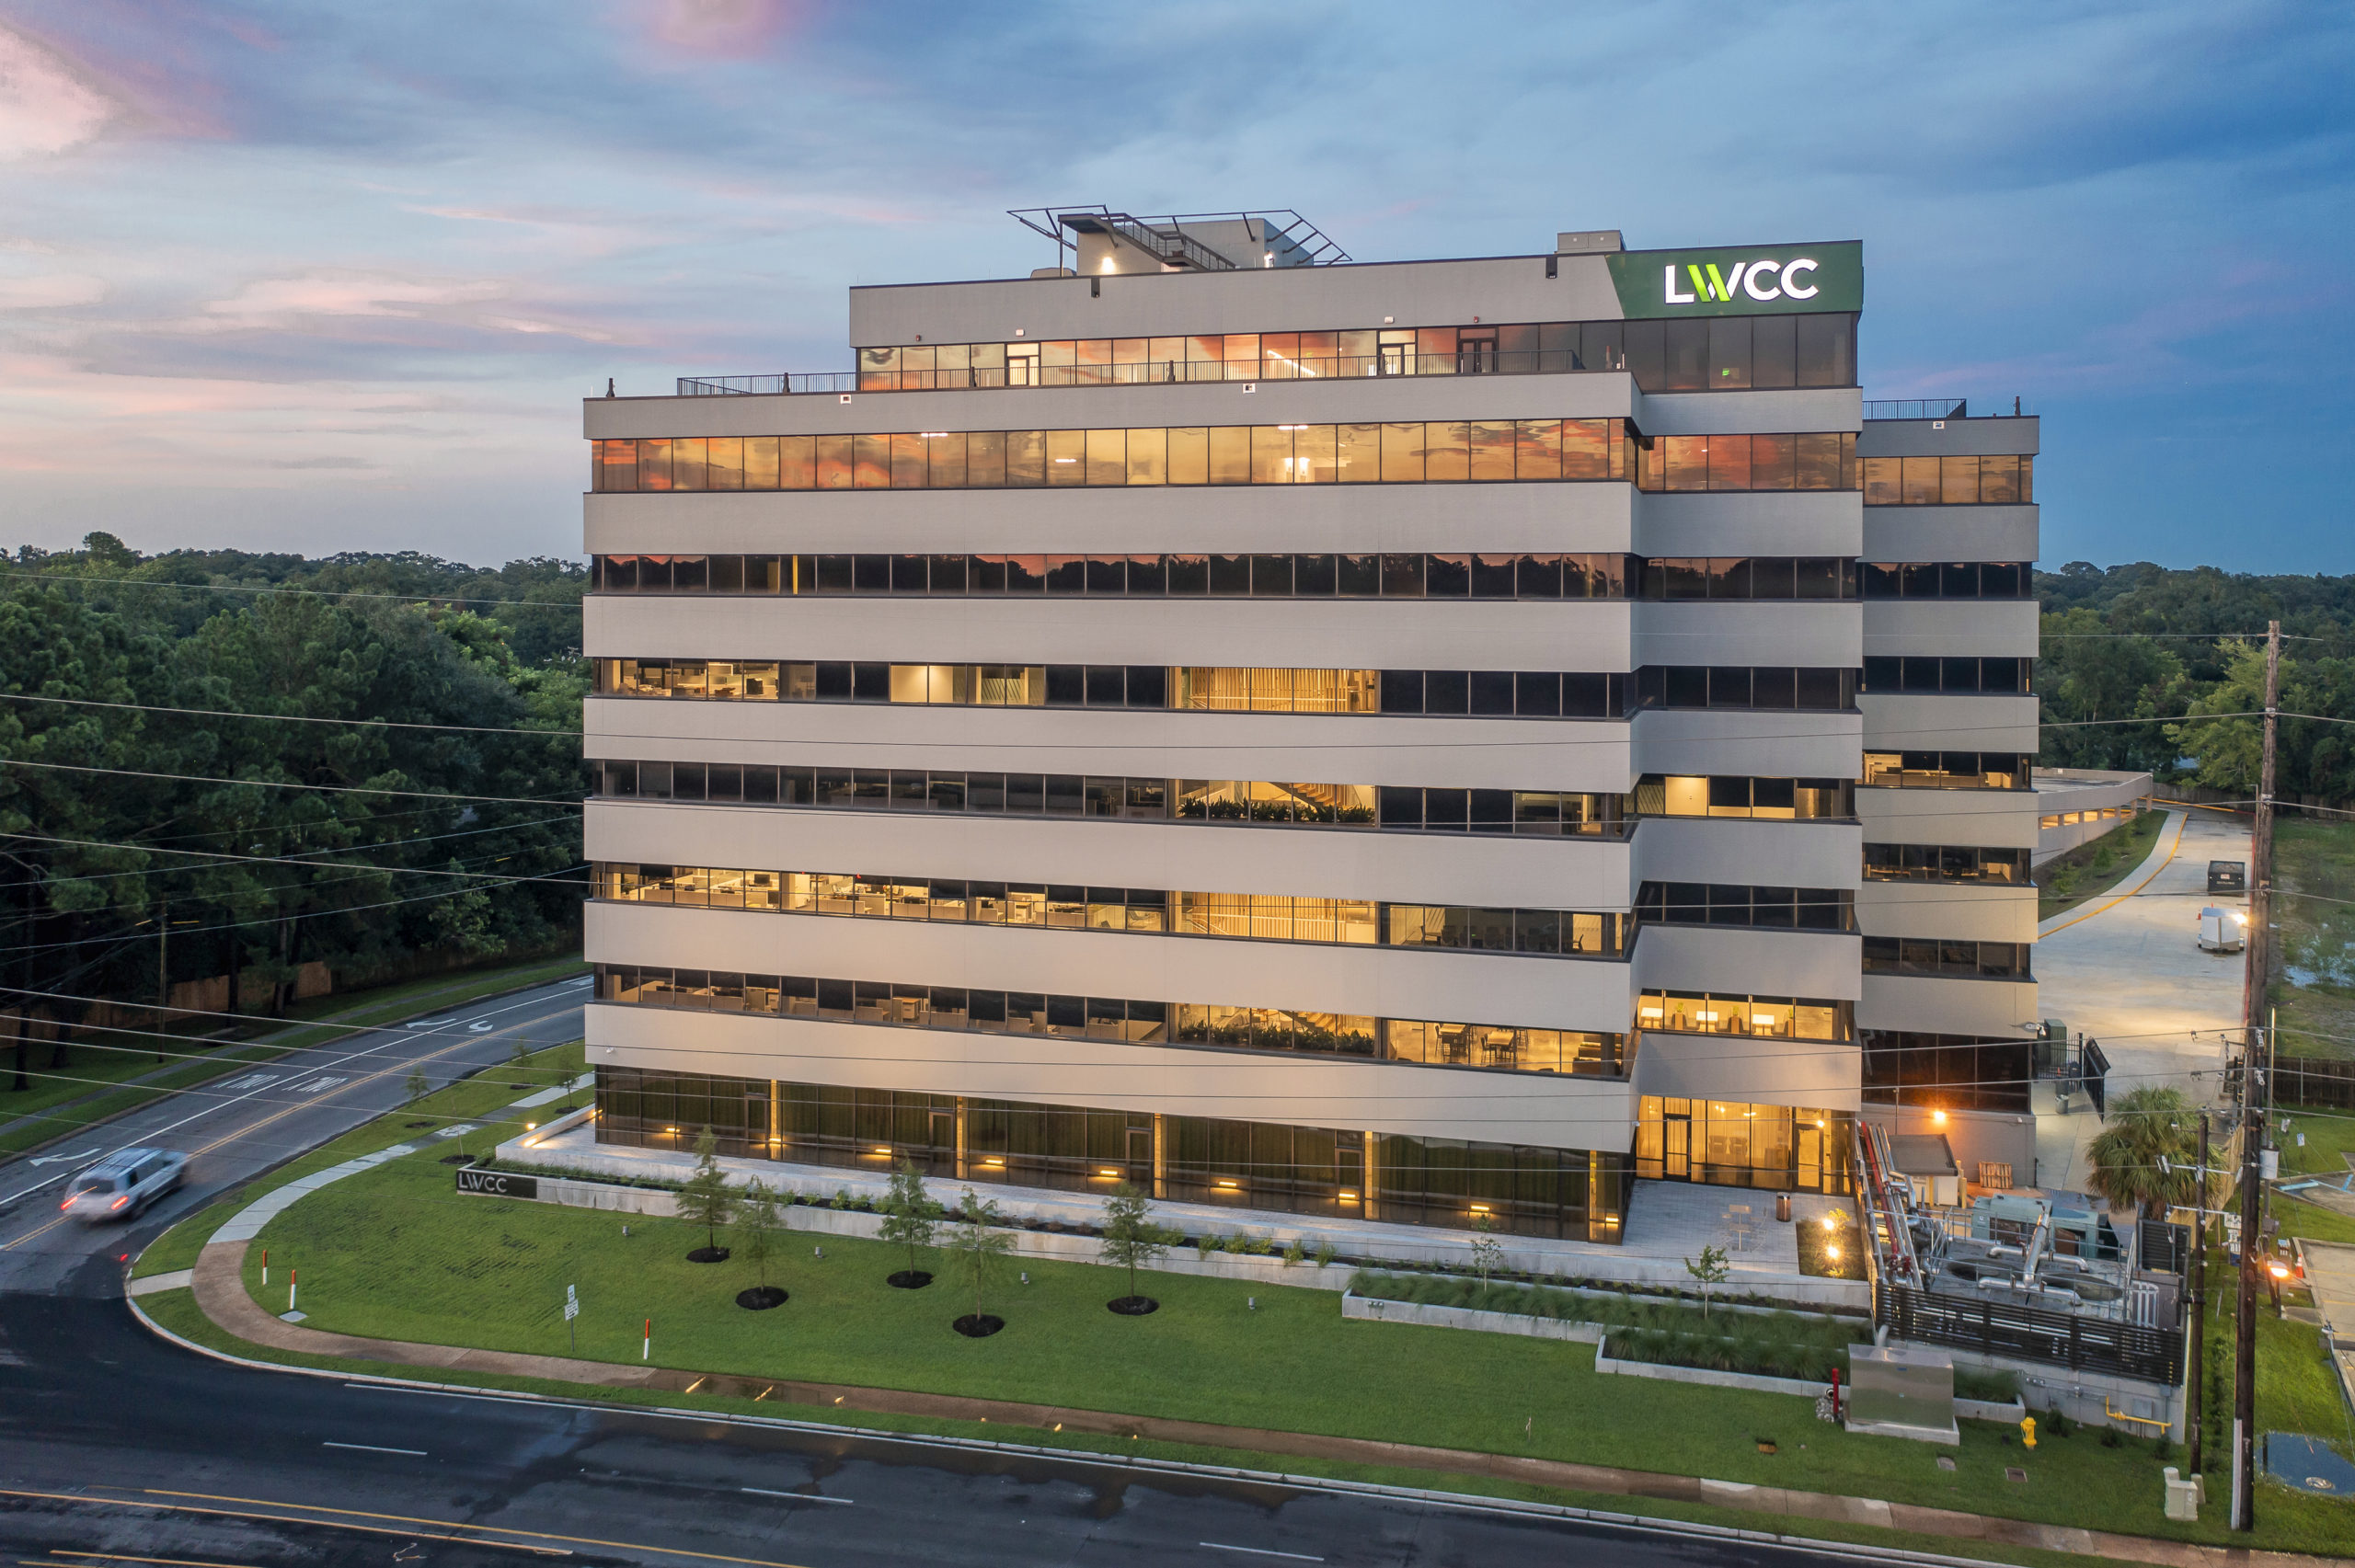 LWCC Office Building Renovation